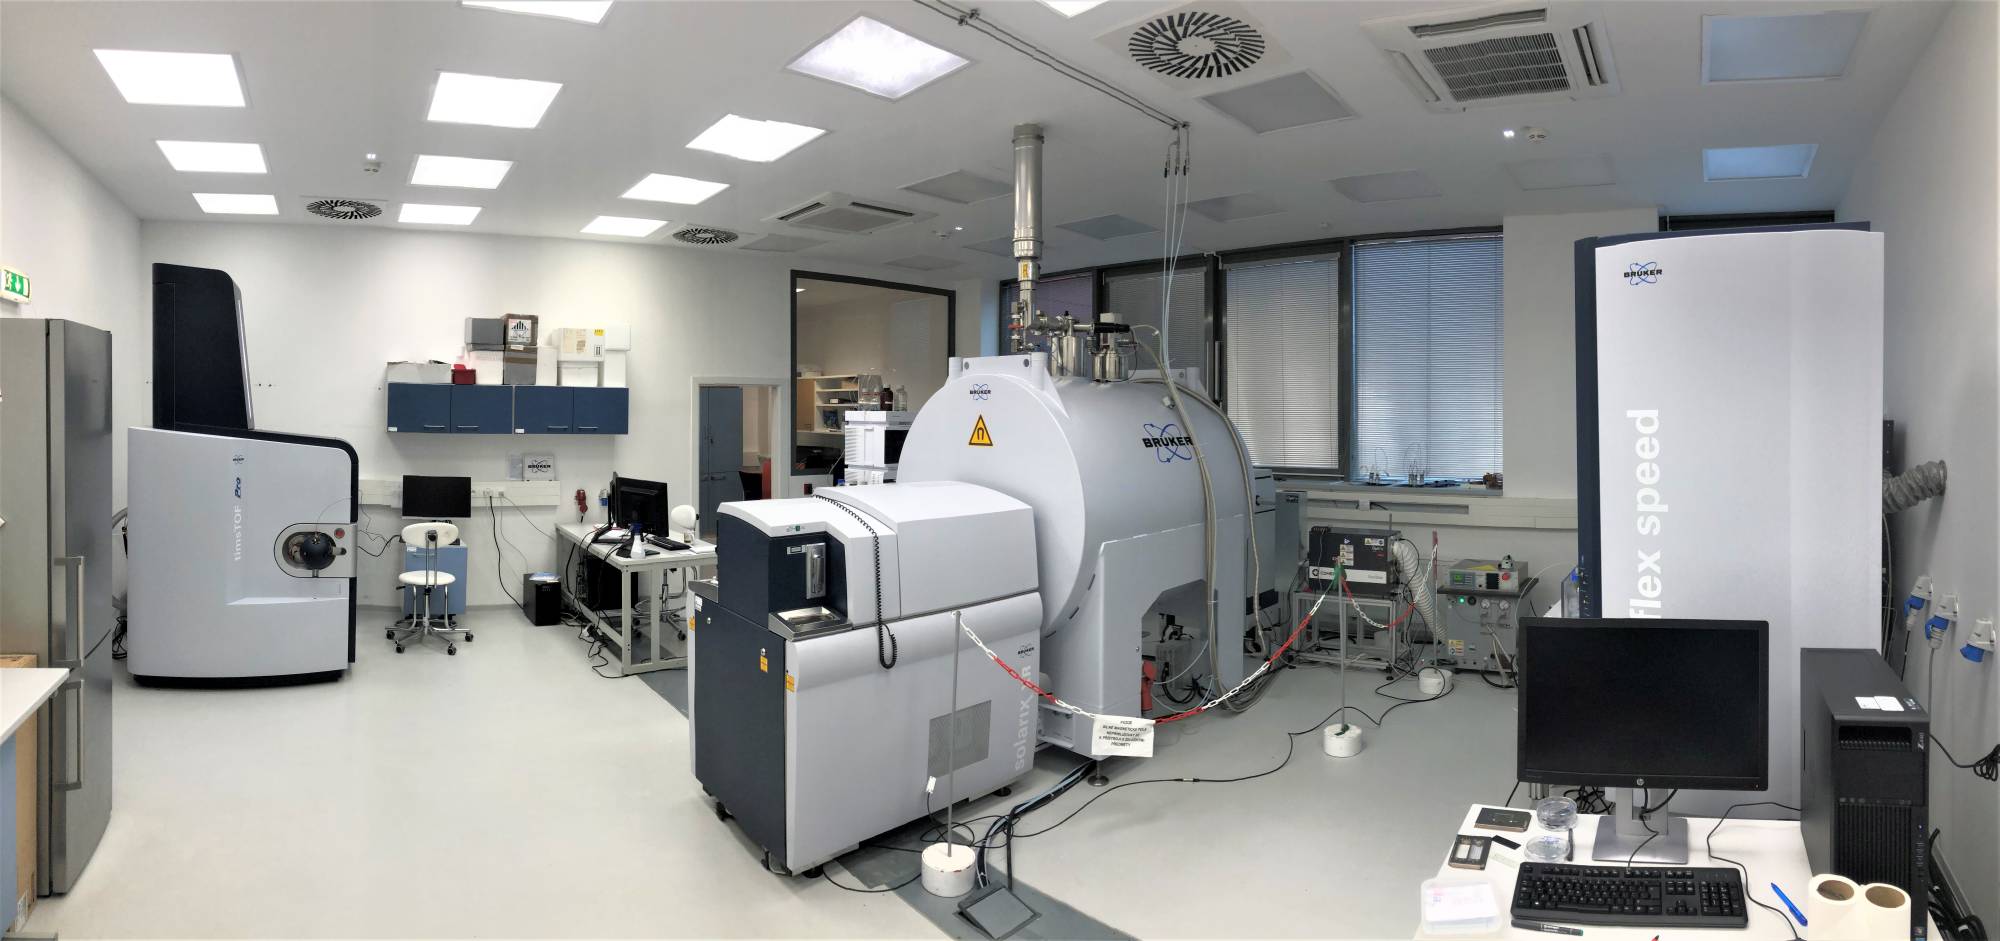 Institute of Biotechnology CAS: Instruct-ERIC course in Biophysics, structural mass spectrometry, and X-ray techniques